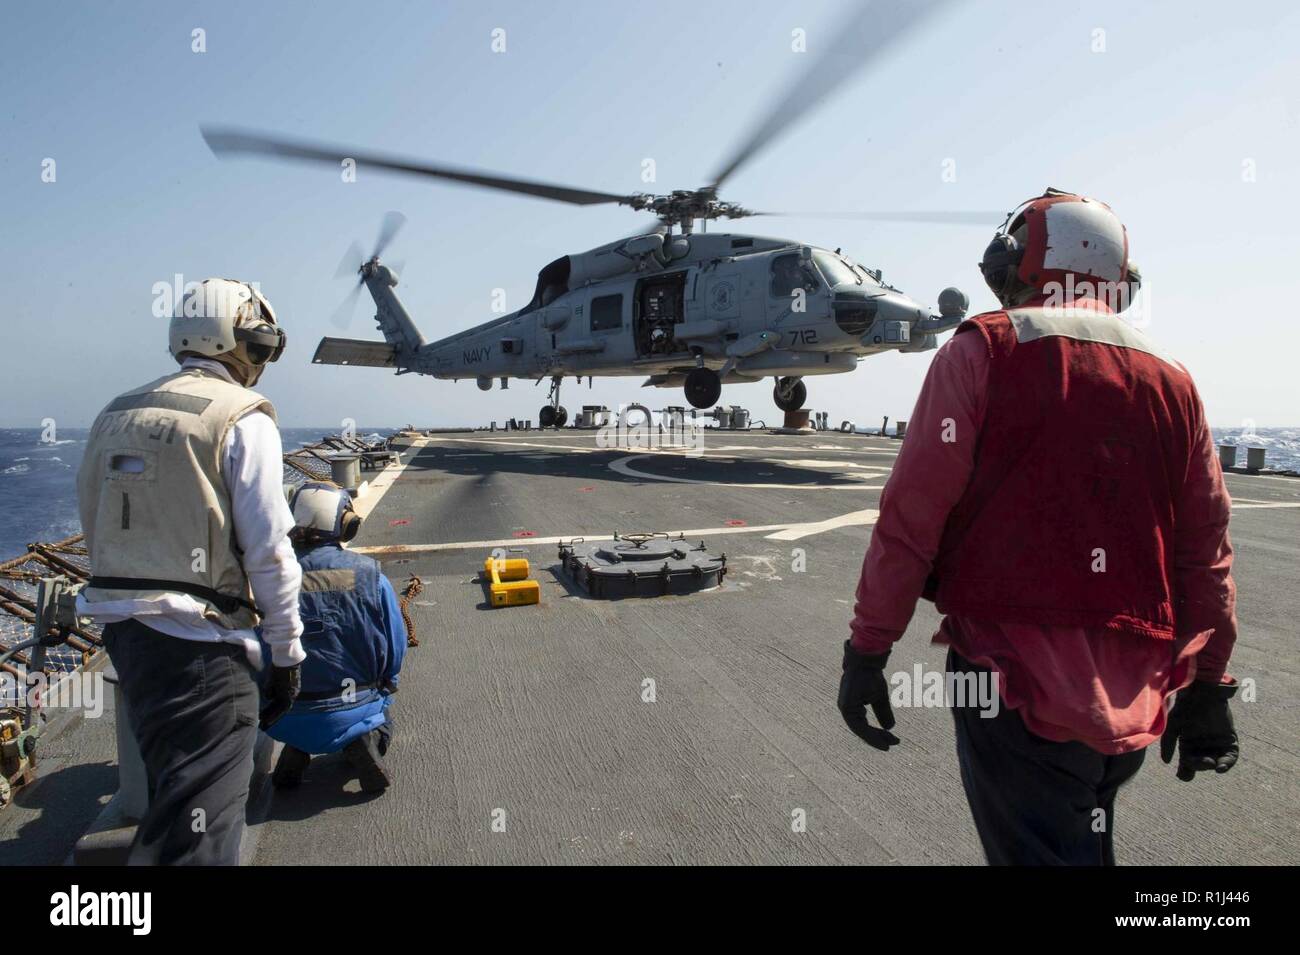 MEDITERRANEAN SEA (Sept. 26, 2018) An MH-60R Sea Hawk, assigned to the “Vipers” of Helicopter Maritime Strike Squadron (HSM) 48, lands aboard the Arleigh Burke-class guided-missile destroyer USS Arleigh Burke (DDG 51) in the Mediterranean Sea Sept. 26, 2018. Arleigh Burke, homeported at Naval Station Norfolk, is conducting naval operations in the U.S. 6th Fleet area of operations in support of U.S. national security interests in Europe and Africa. Stock Photo